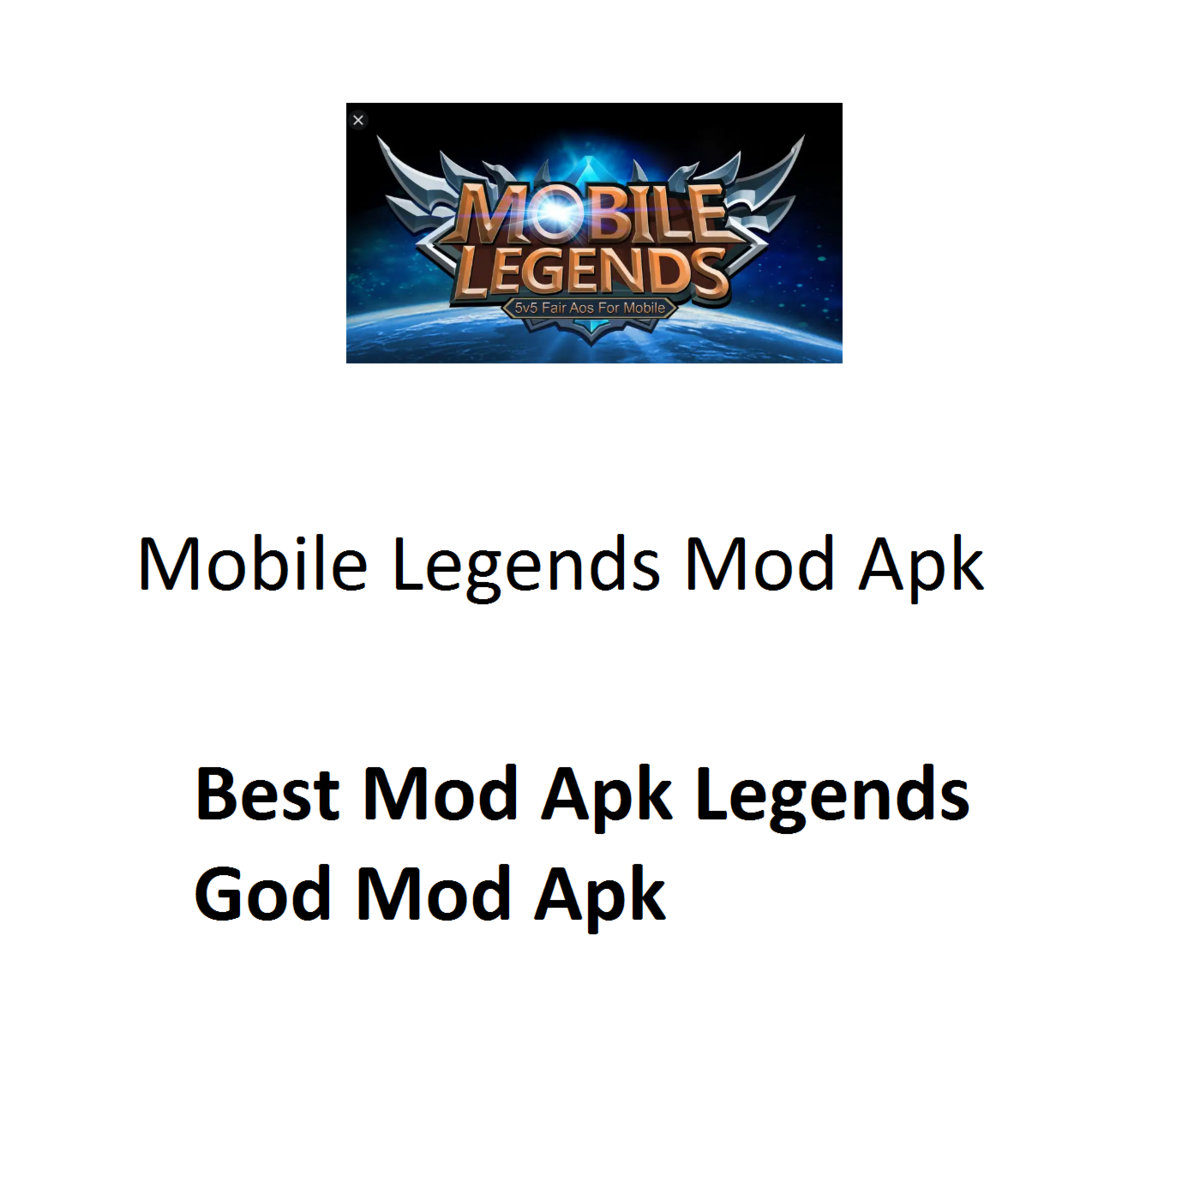 Mobile Legends Mod Apk | Mobile Legends Mod Apk Latest Version For Android  | Modapkdone